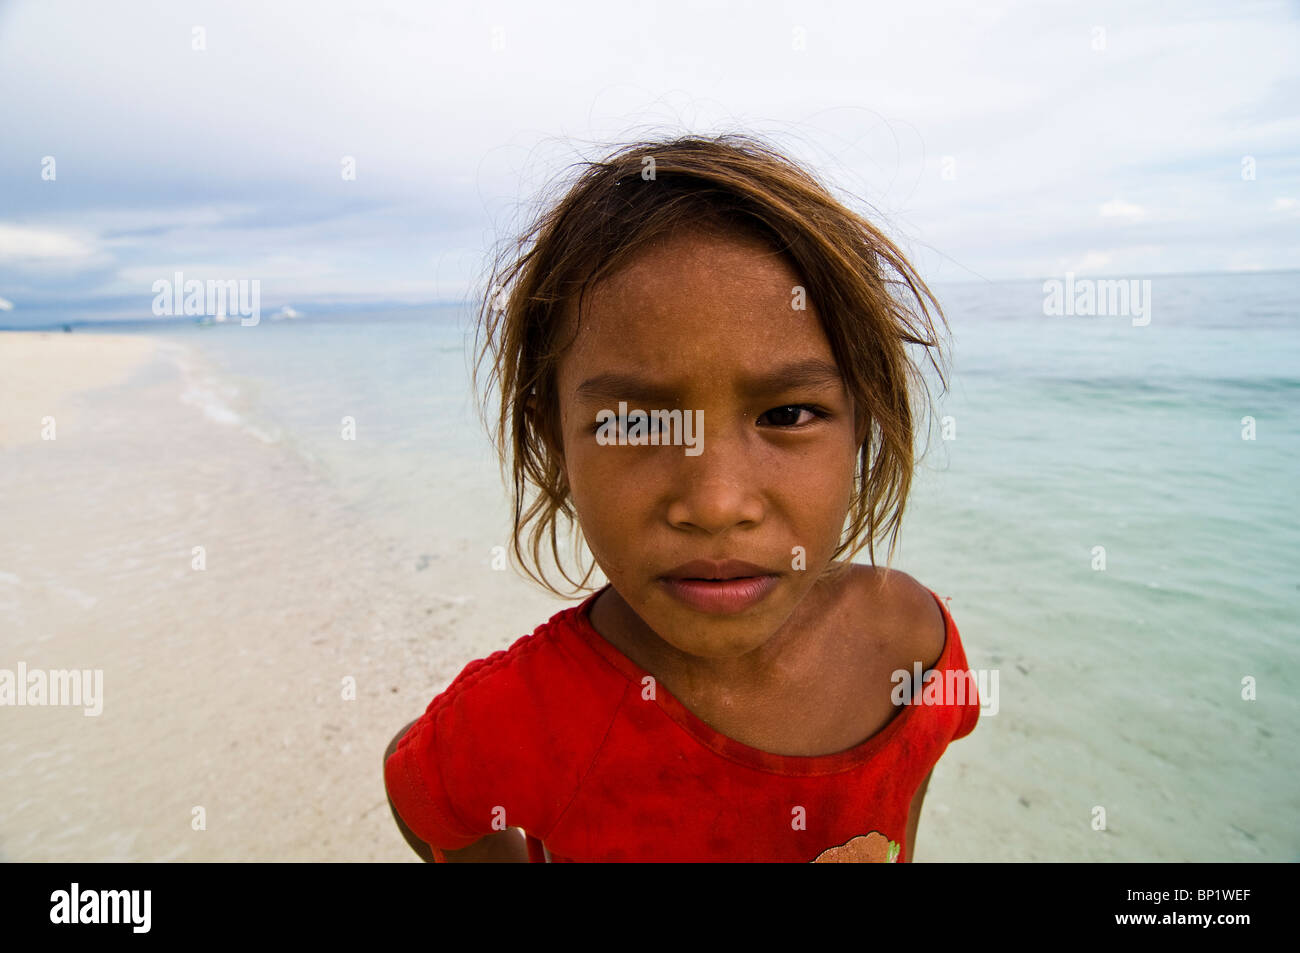 Philippines Girl Banque D Image Et Photos Page 2 Alamy